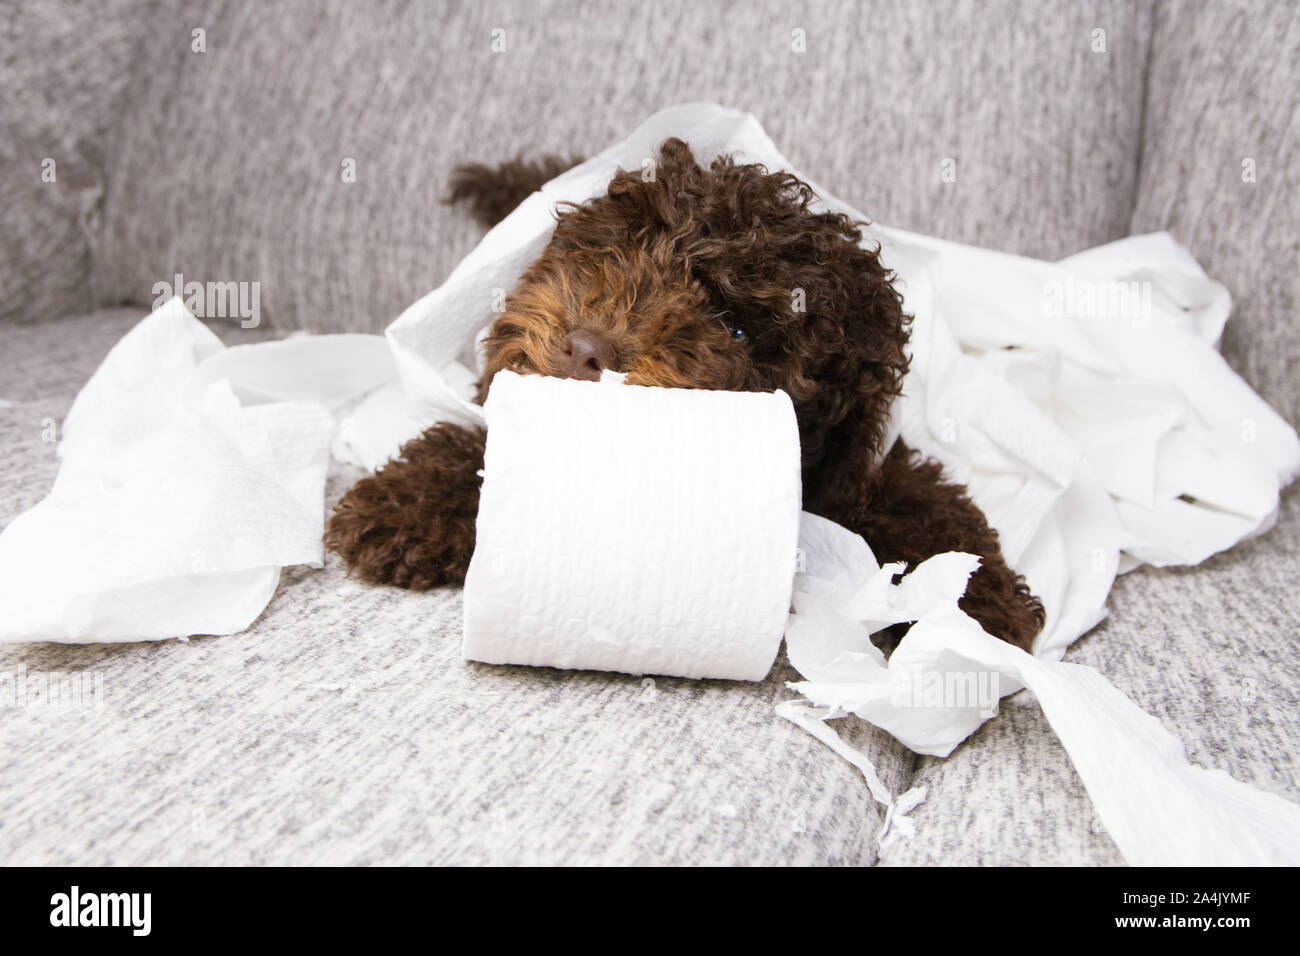 puppy dog mischief. poodle chewing, biting and unrolling toilet paper. Disobey and education concept. Stock Photo